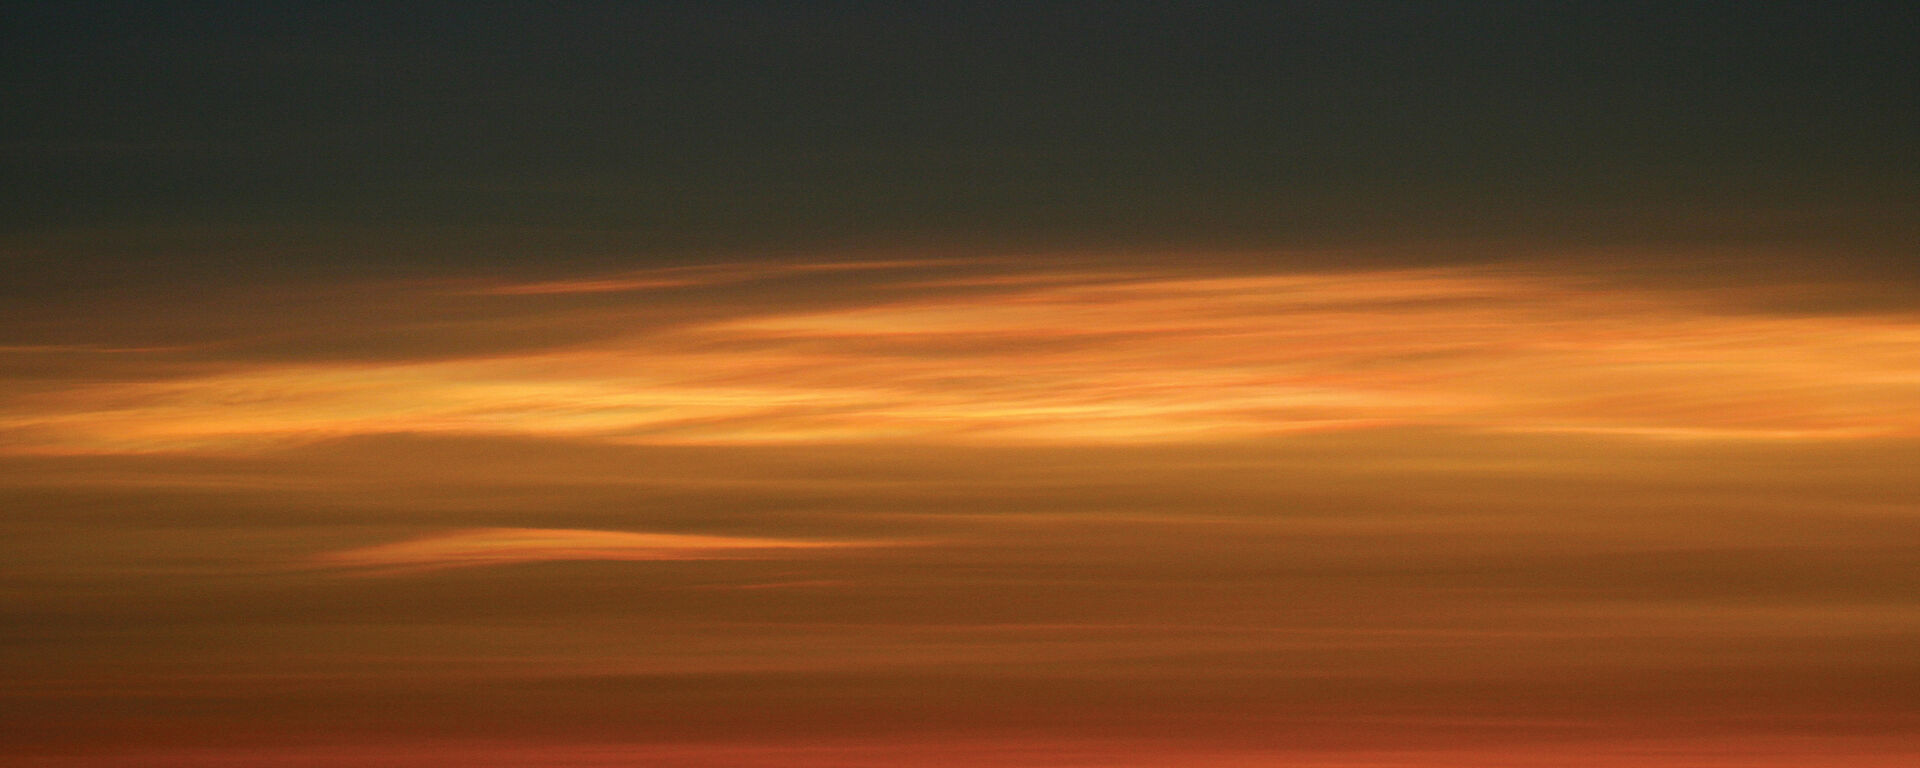 Stratospheric clouds, illuminated by the sun during twilight